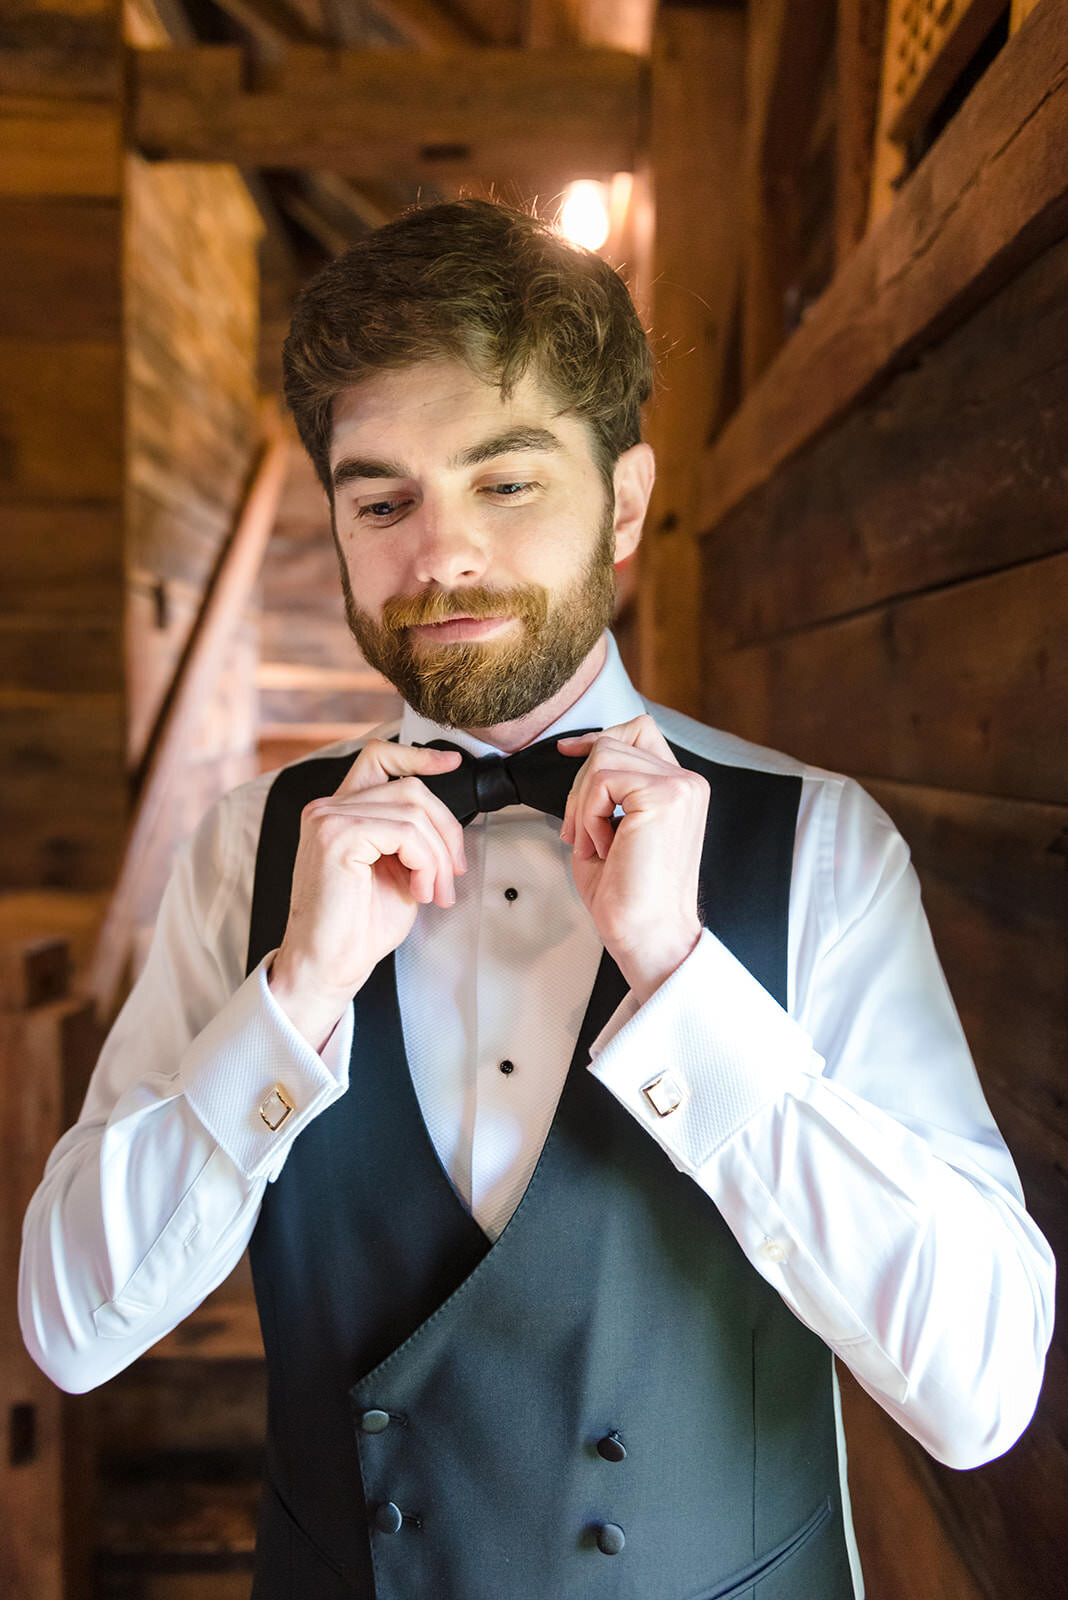 A man in a tuxedo adjusting his bow tie, with a rustic wooden backdrop.